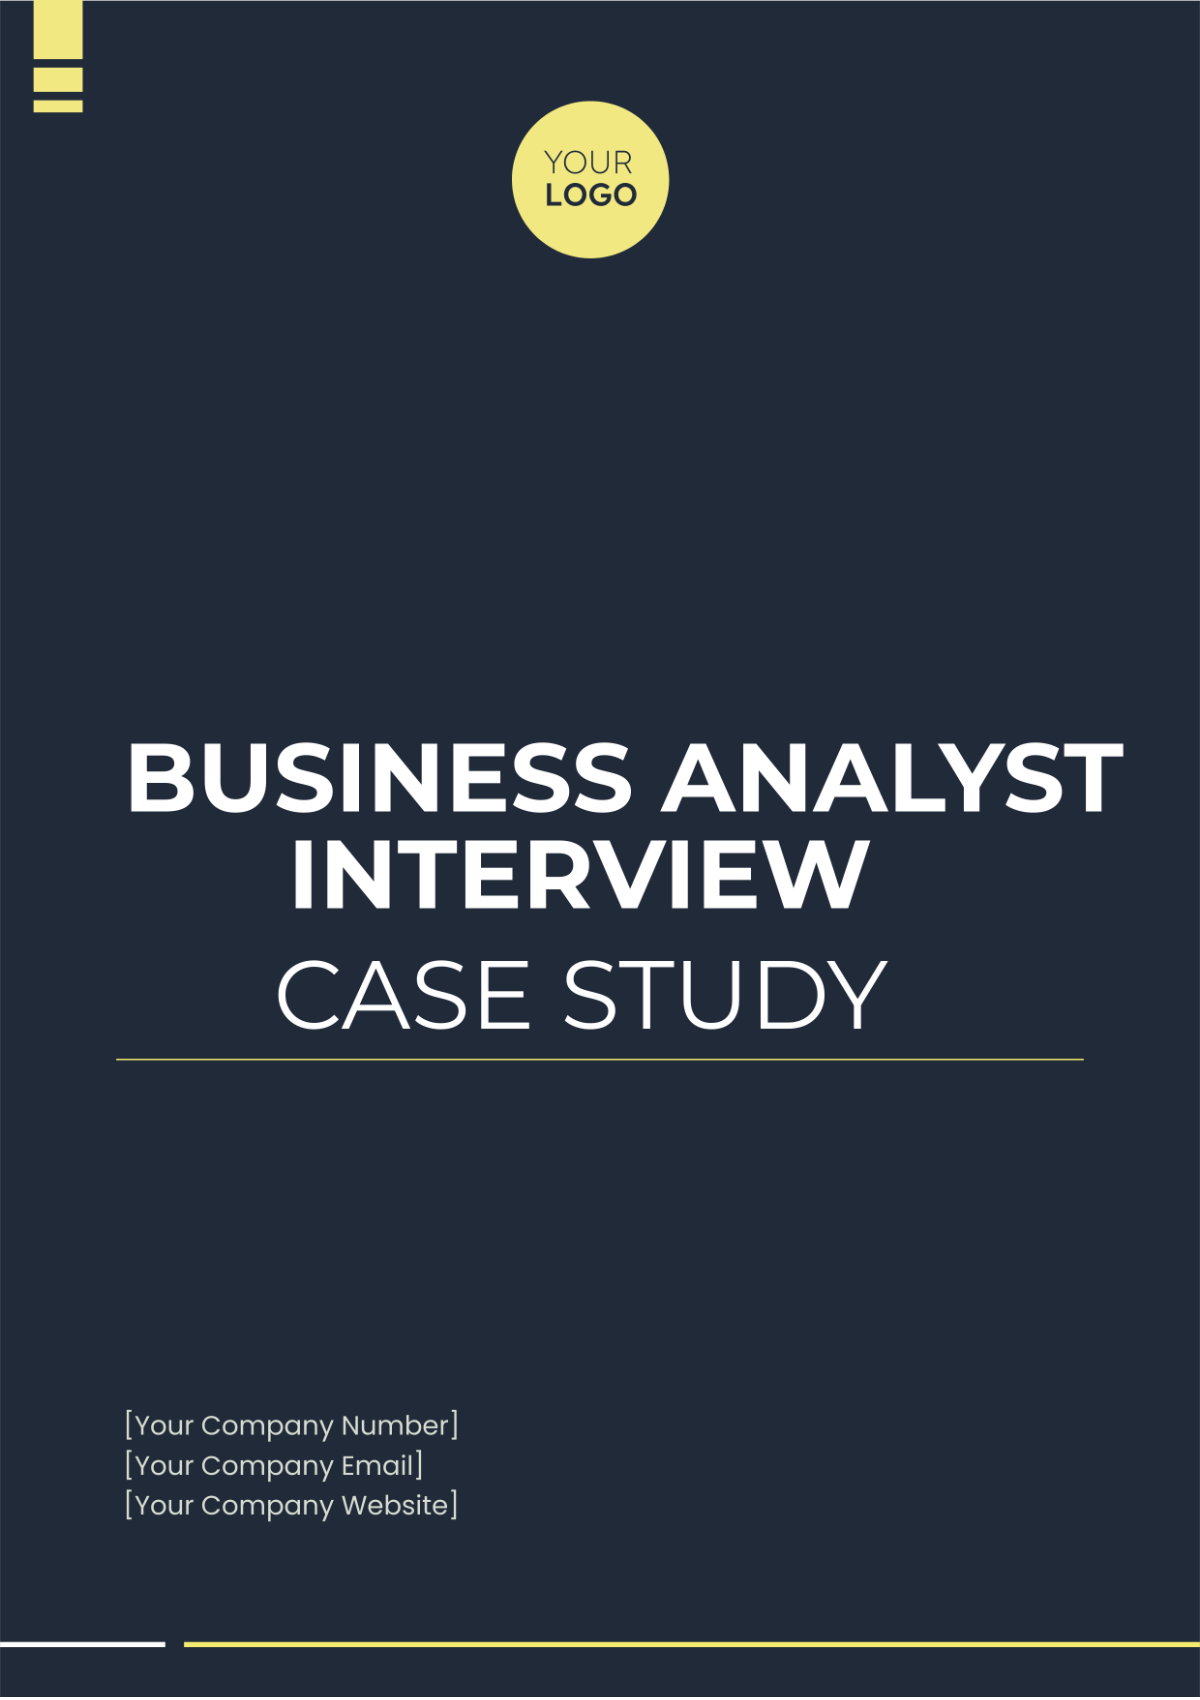 Free Business Analyst Interview Case Study Template